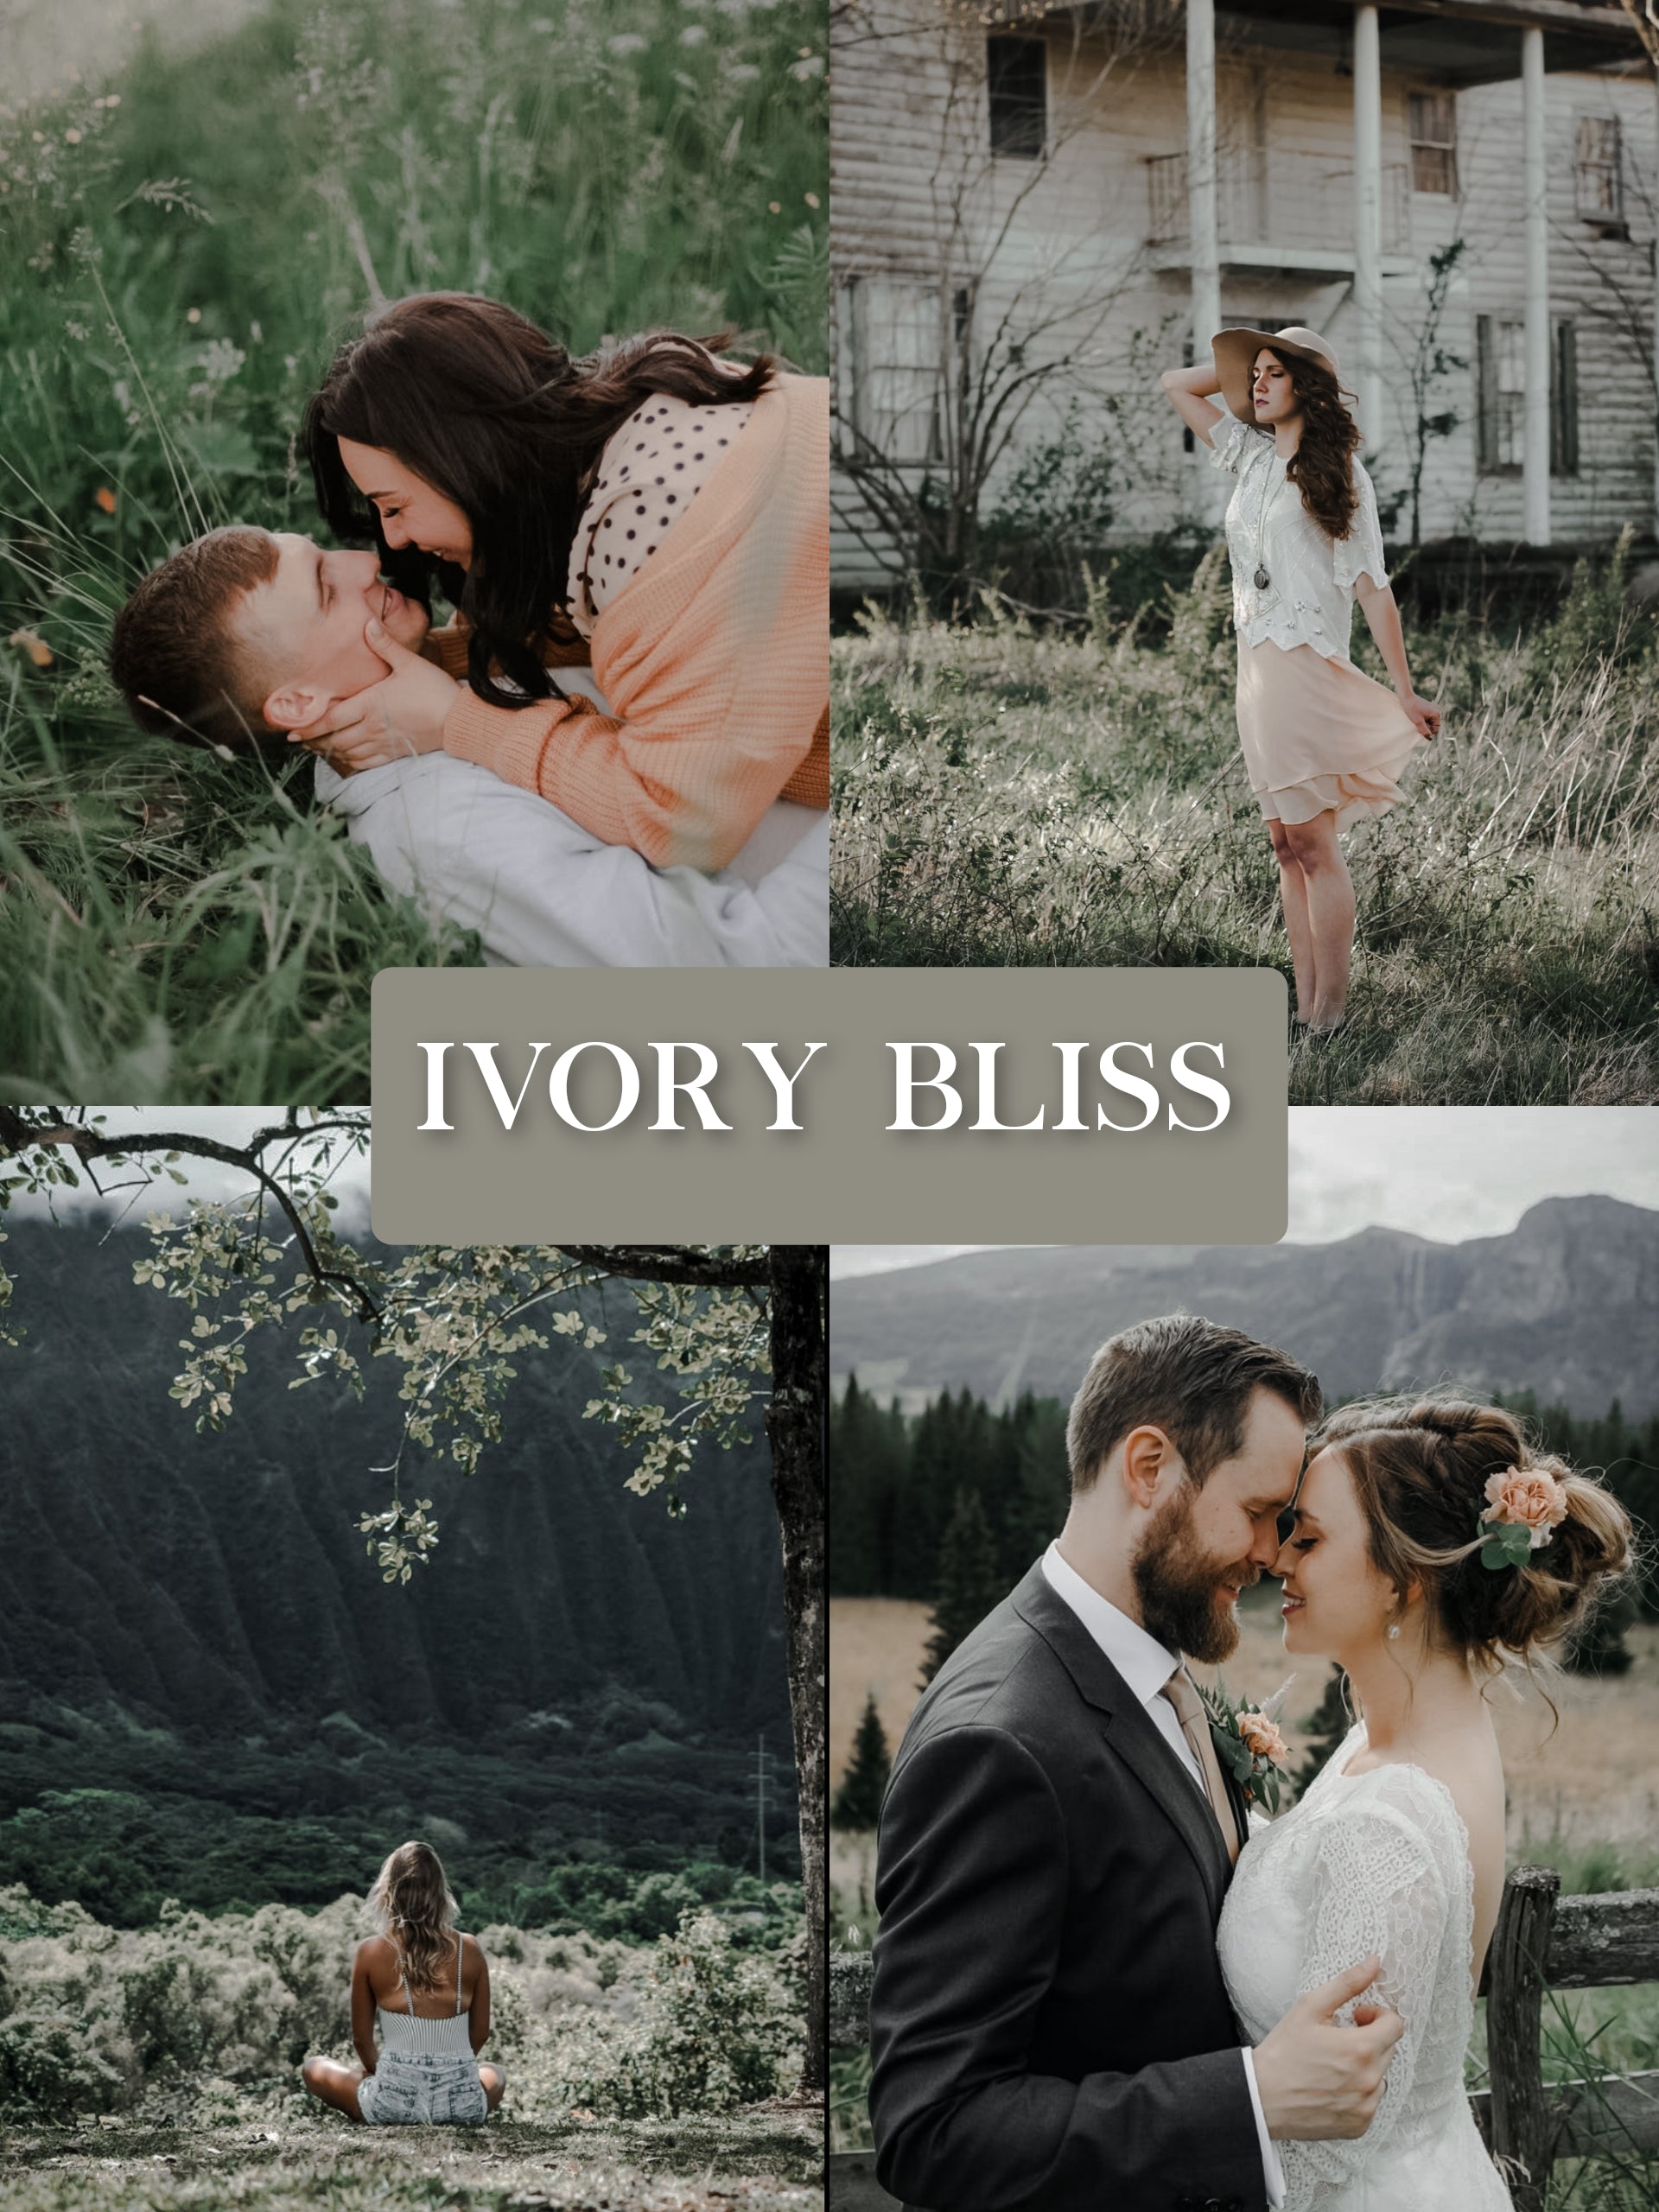 Ivory Bliss - One Click Filter